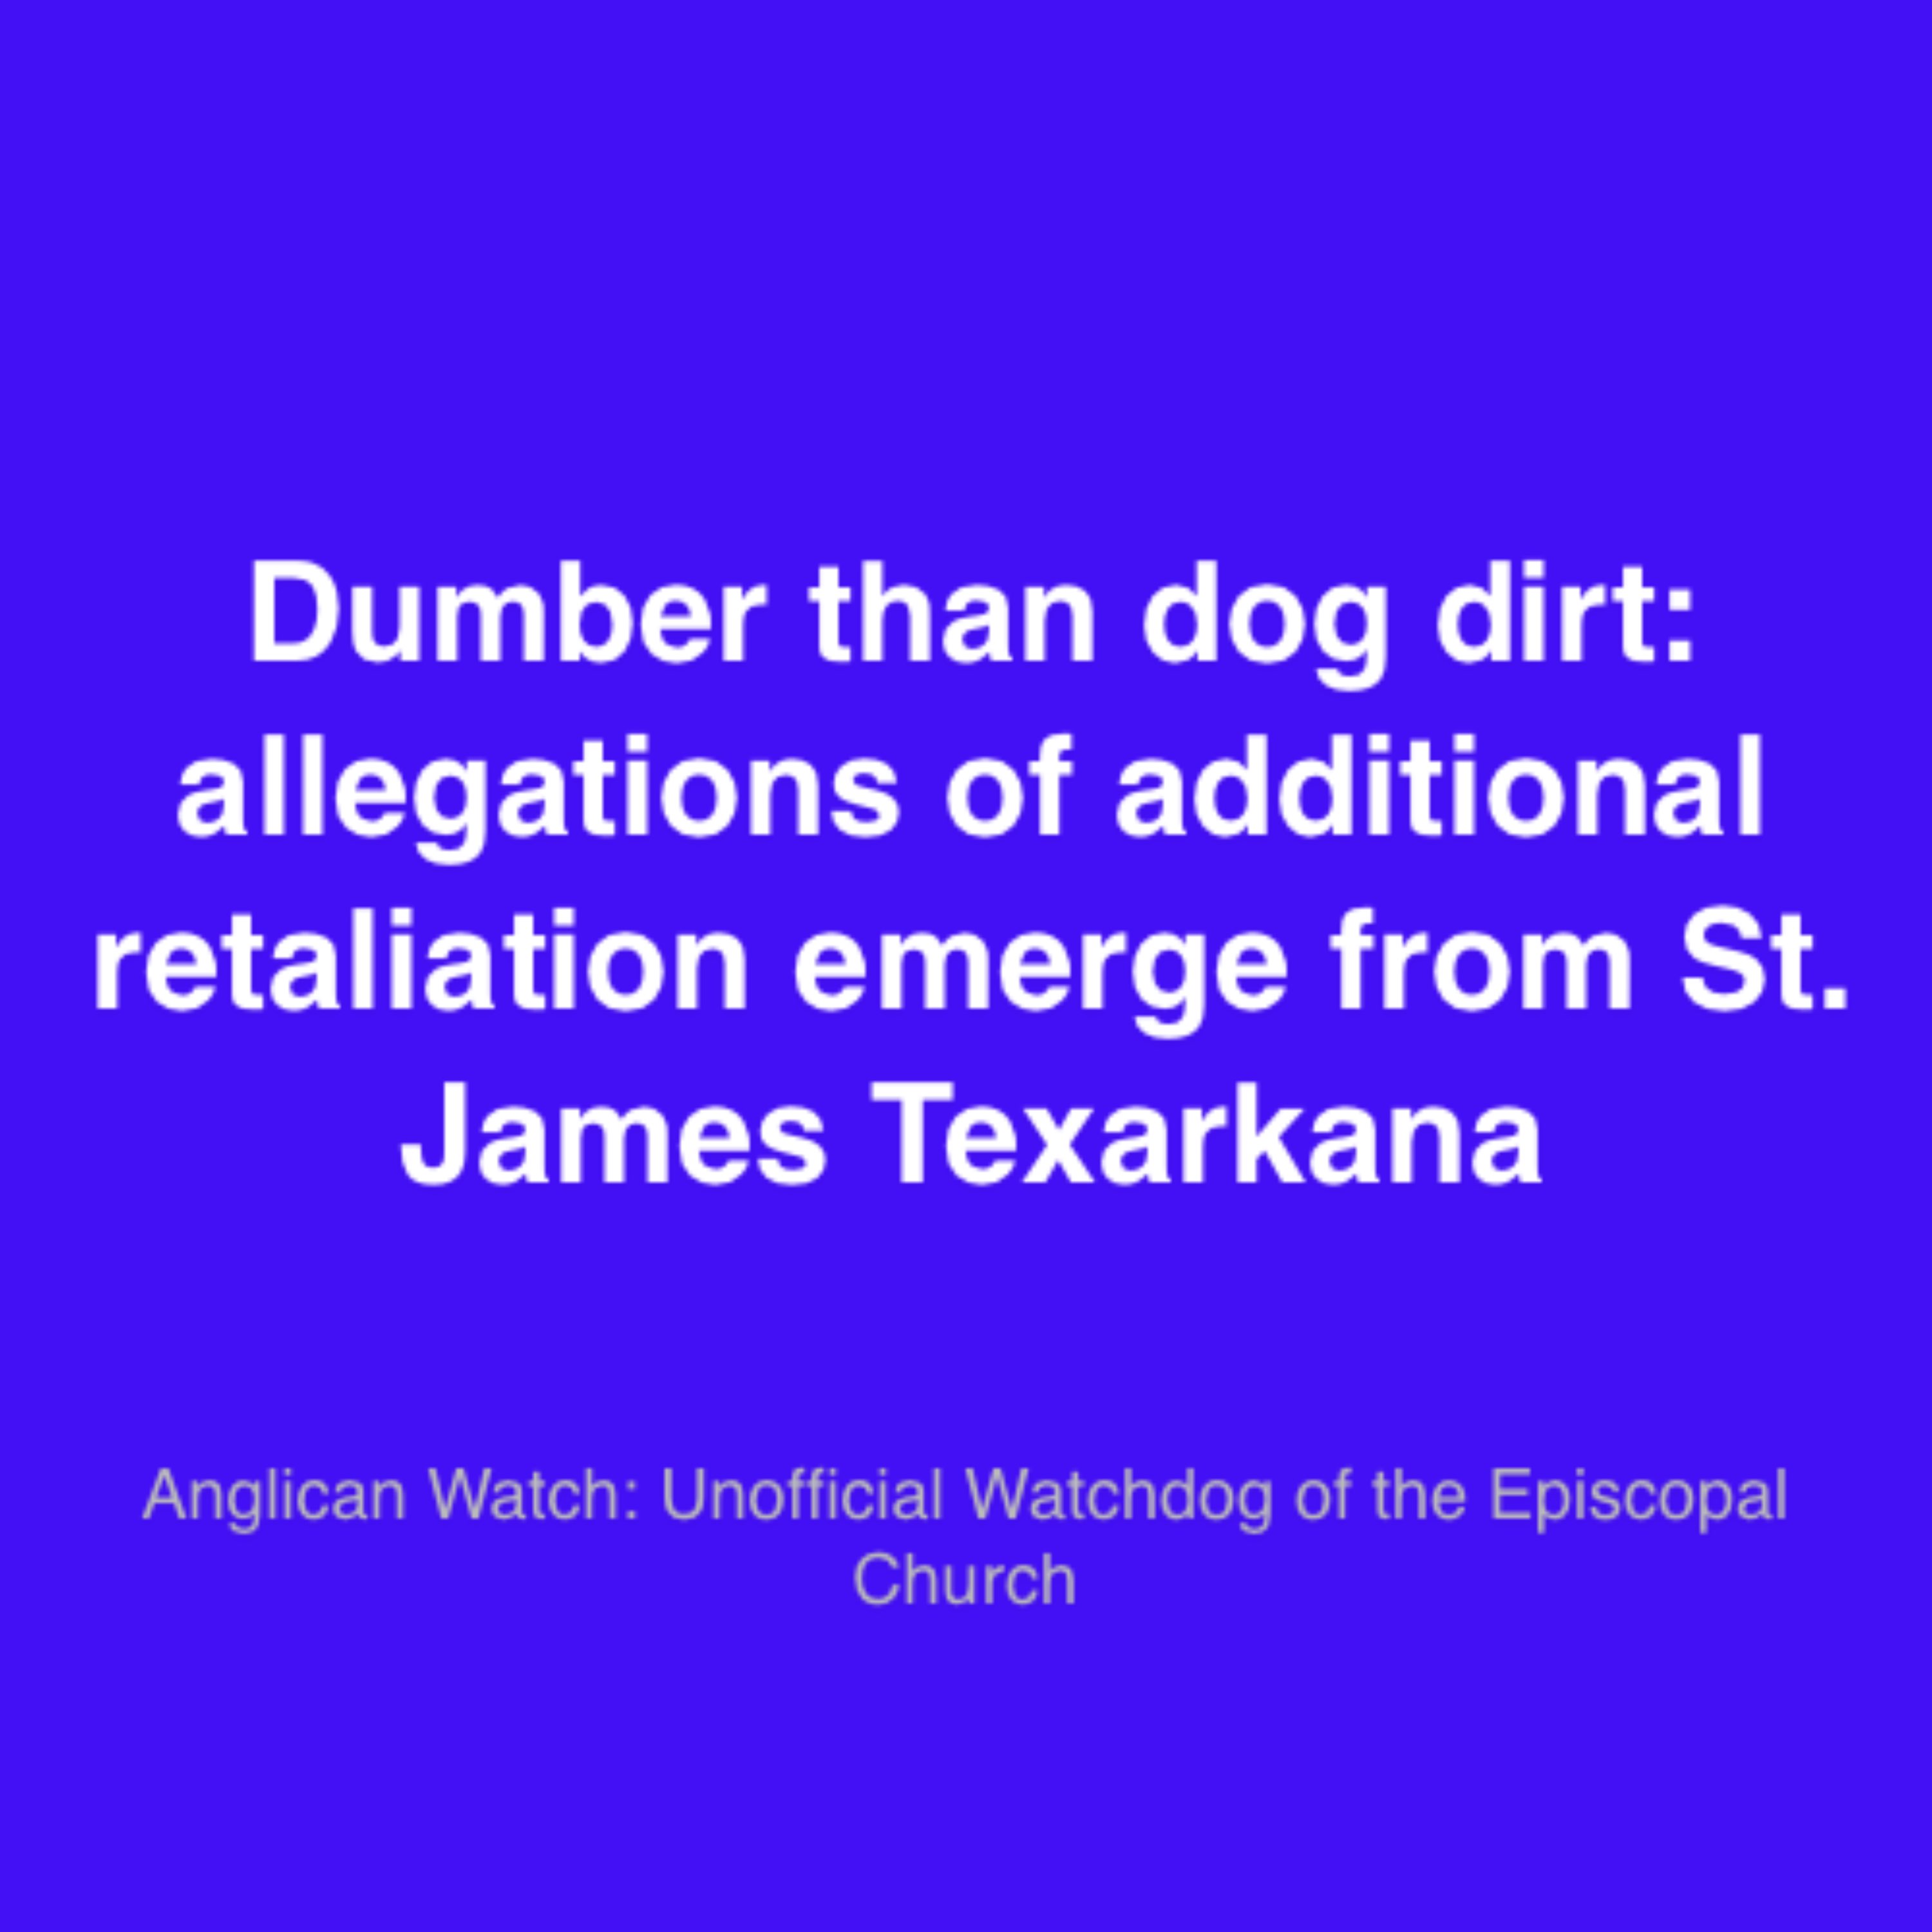 Dumber than dog dirt: allegations of additional retaliation emerge from St. James Texarkana